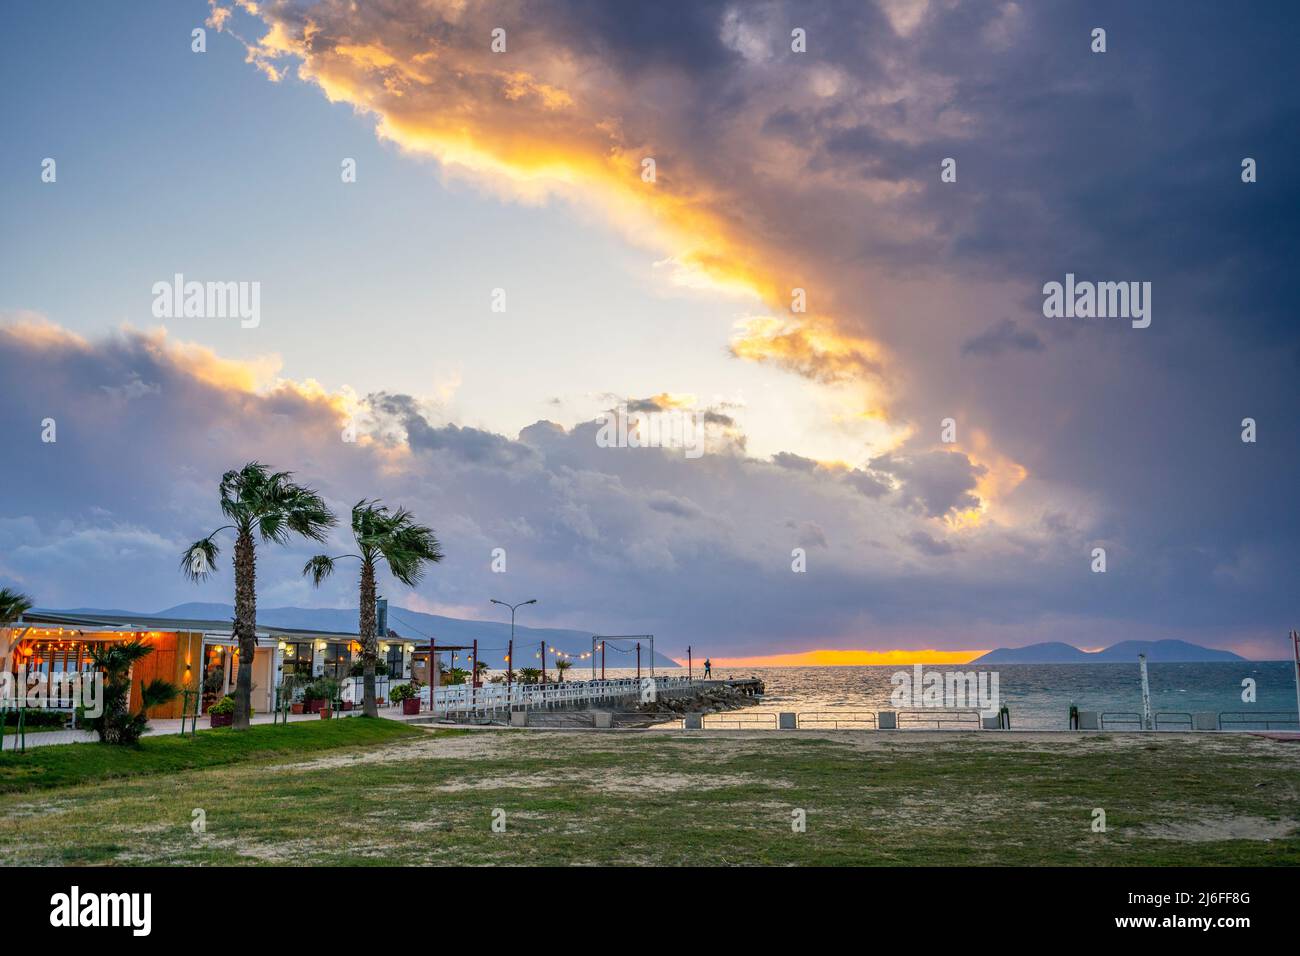 cafe by the sea. restaurant on the beach at sunset Stock Photo